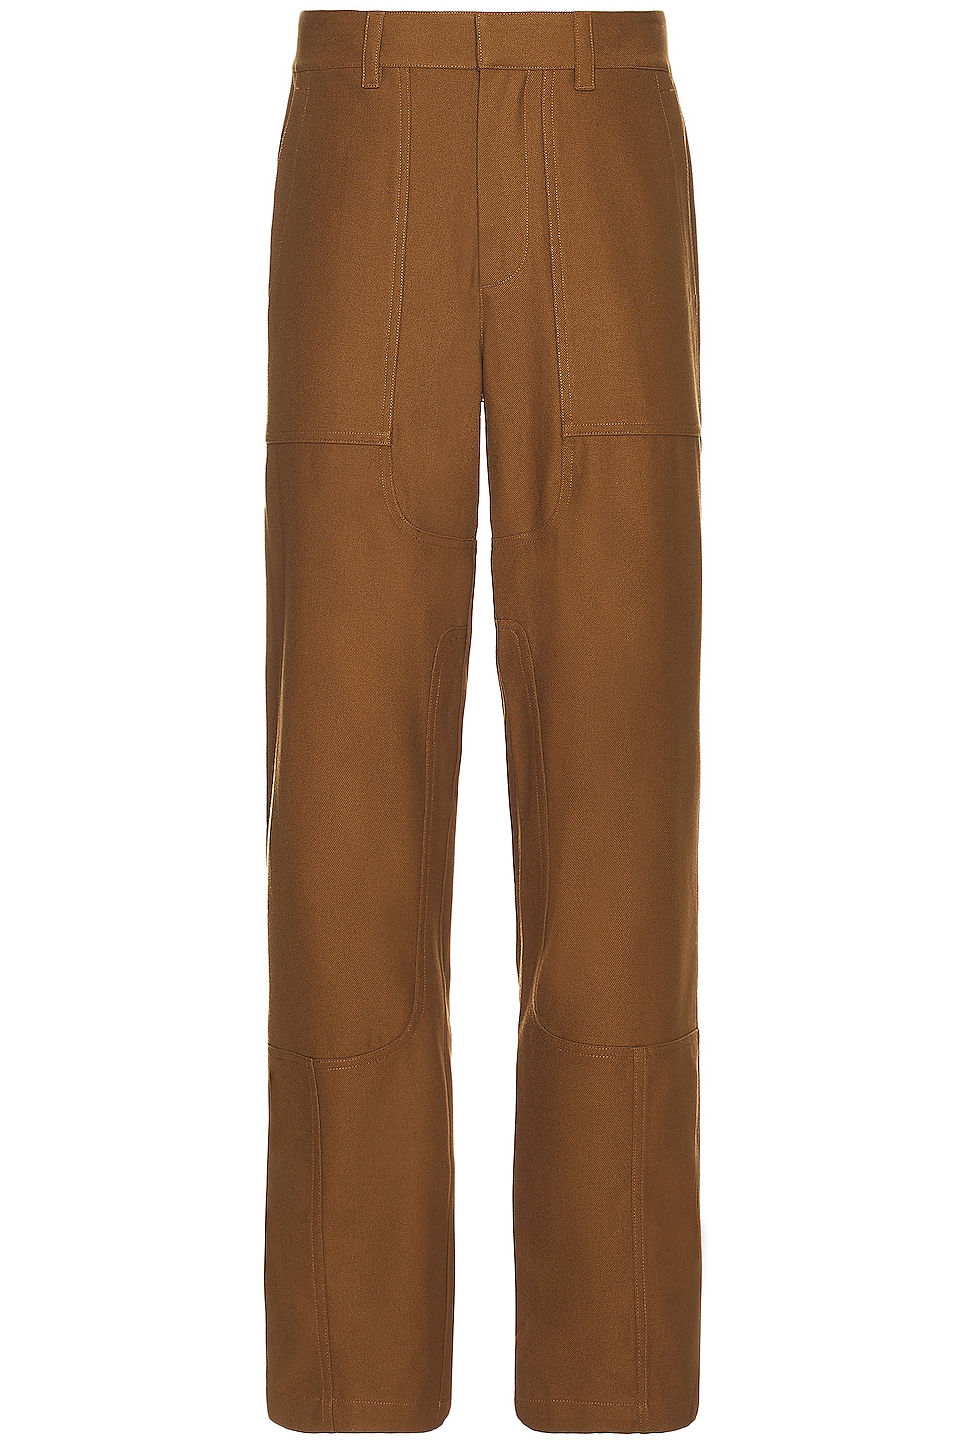 Image 1 of Helmut Lang Utility Pant in Cigar